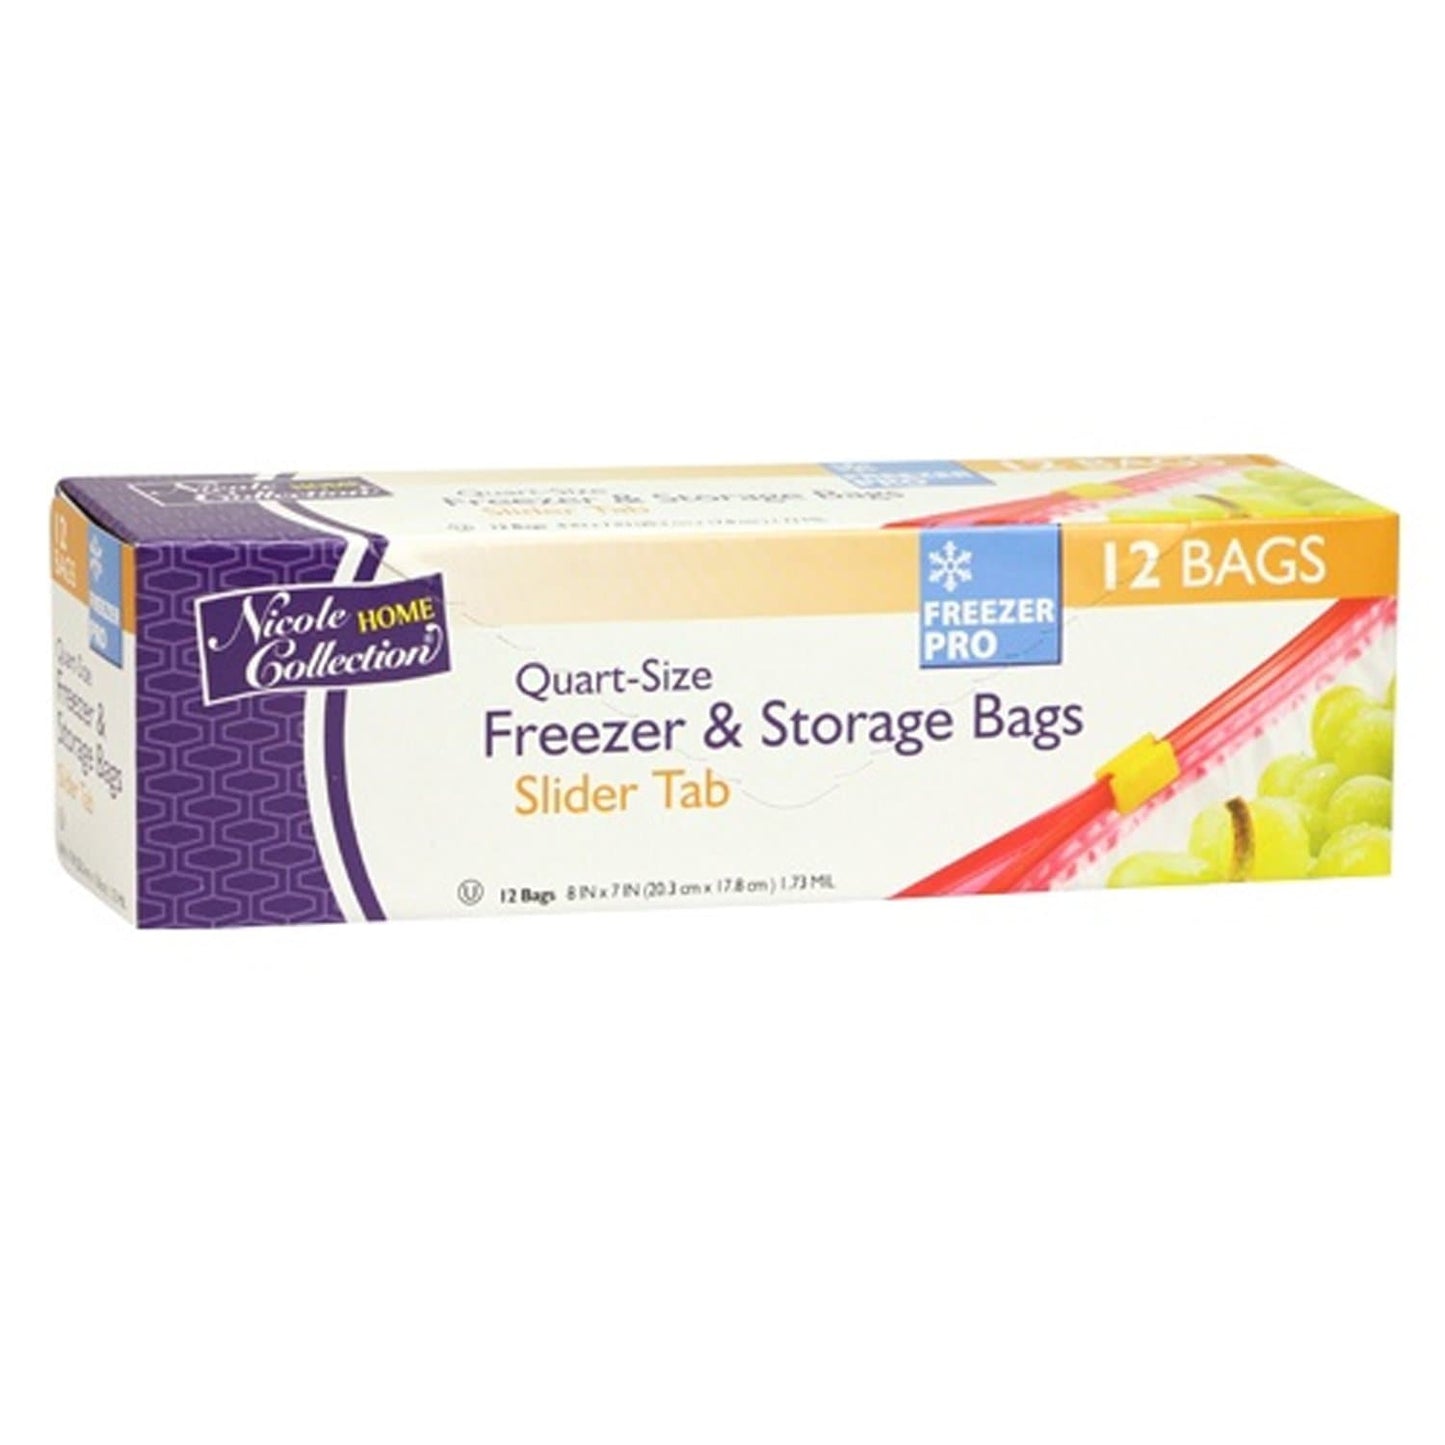 Food Storage Slider Bags, Gallon Size, Value pack, 105 Count